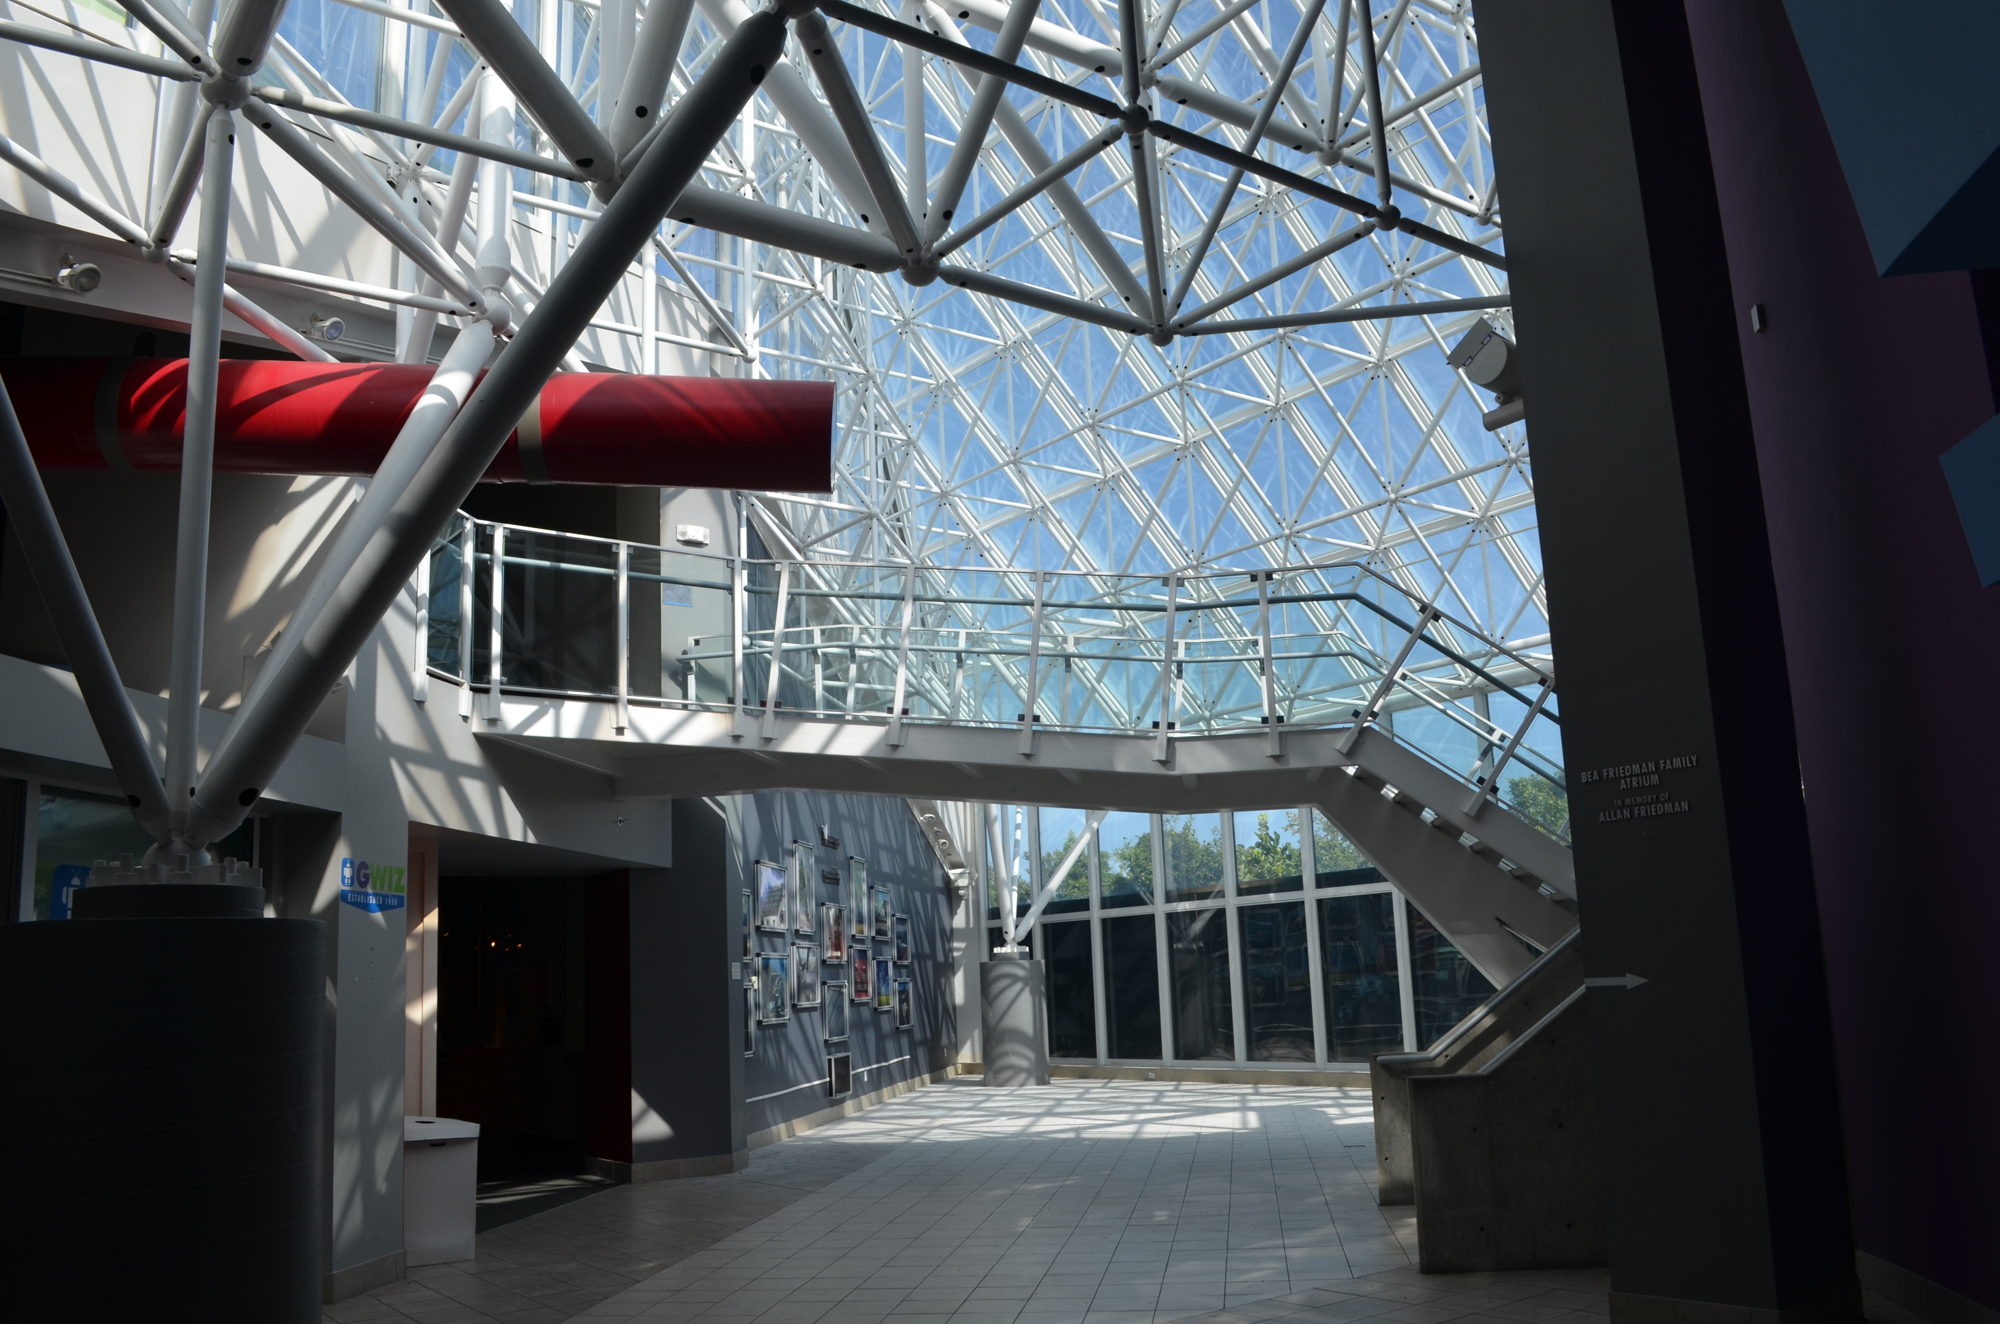 The GWIZ building's glass atrium remains one of its defining architectural characteristics.